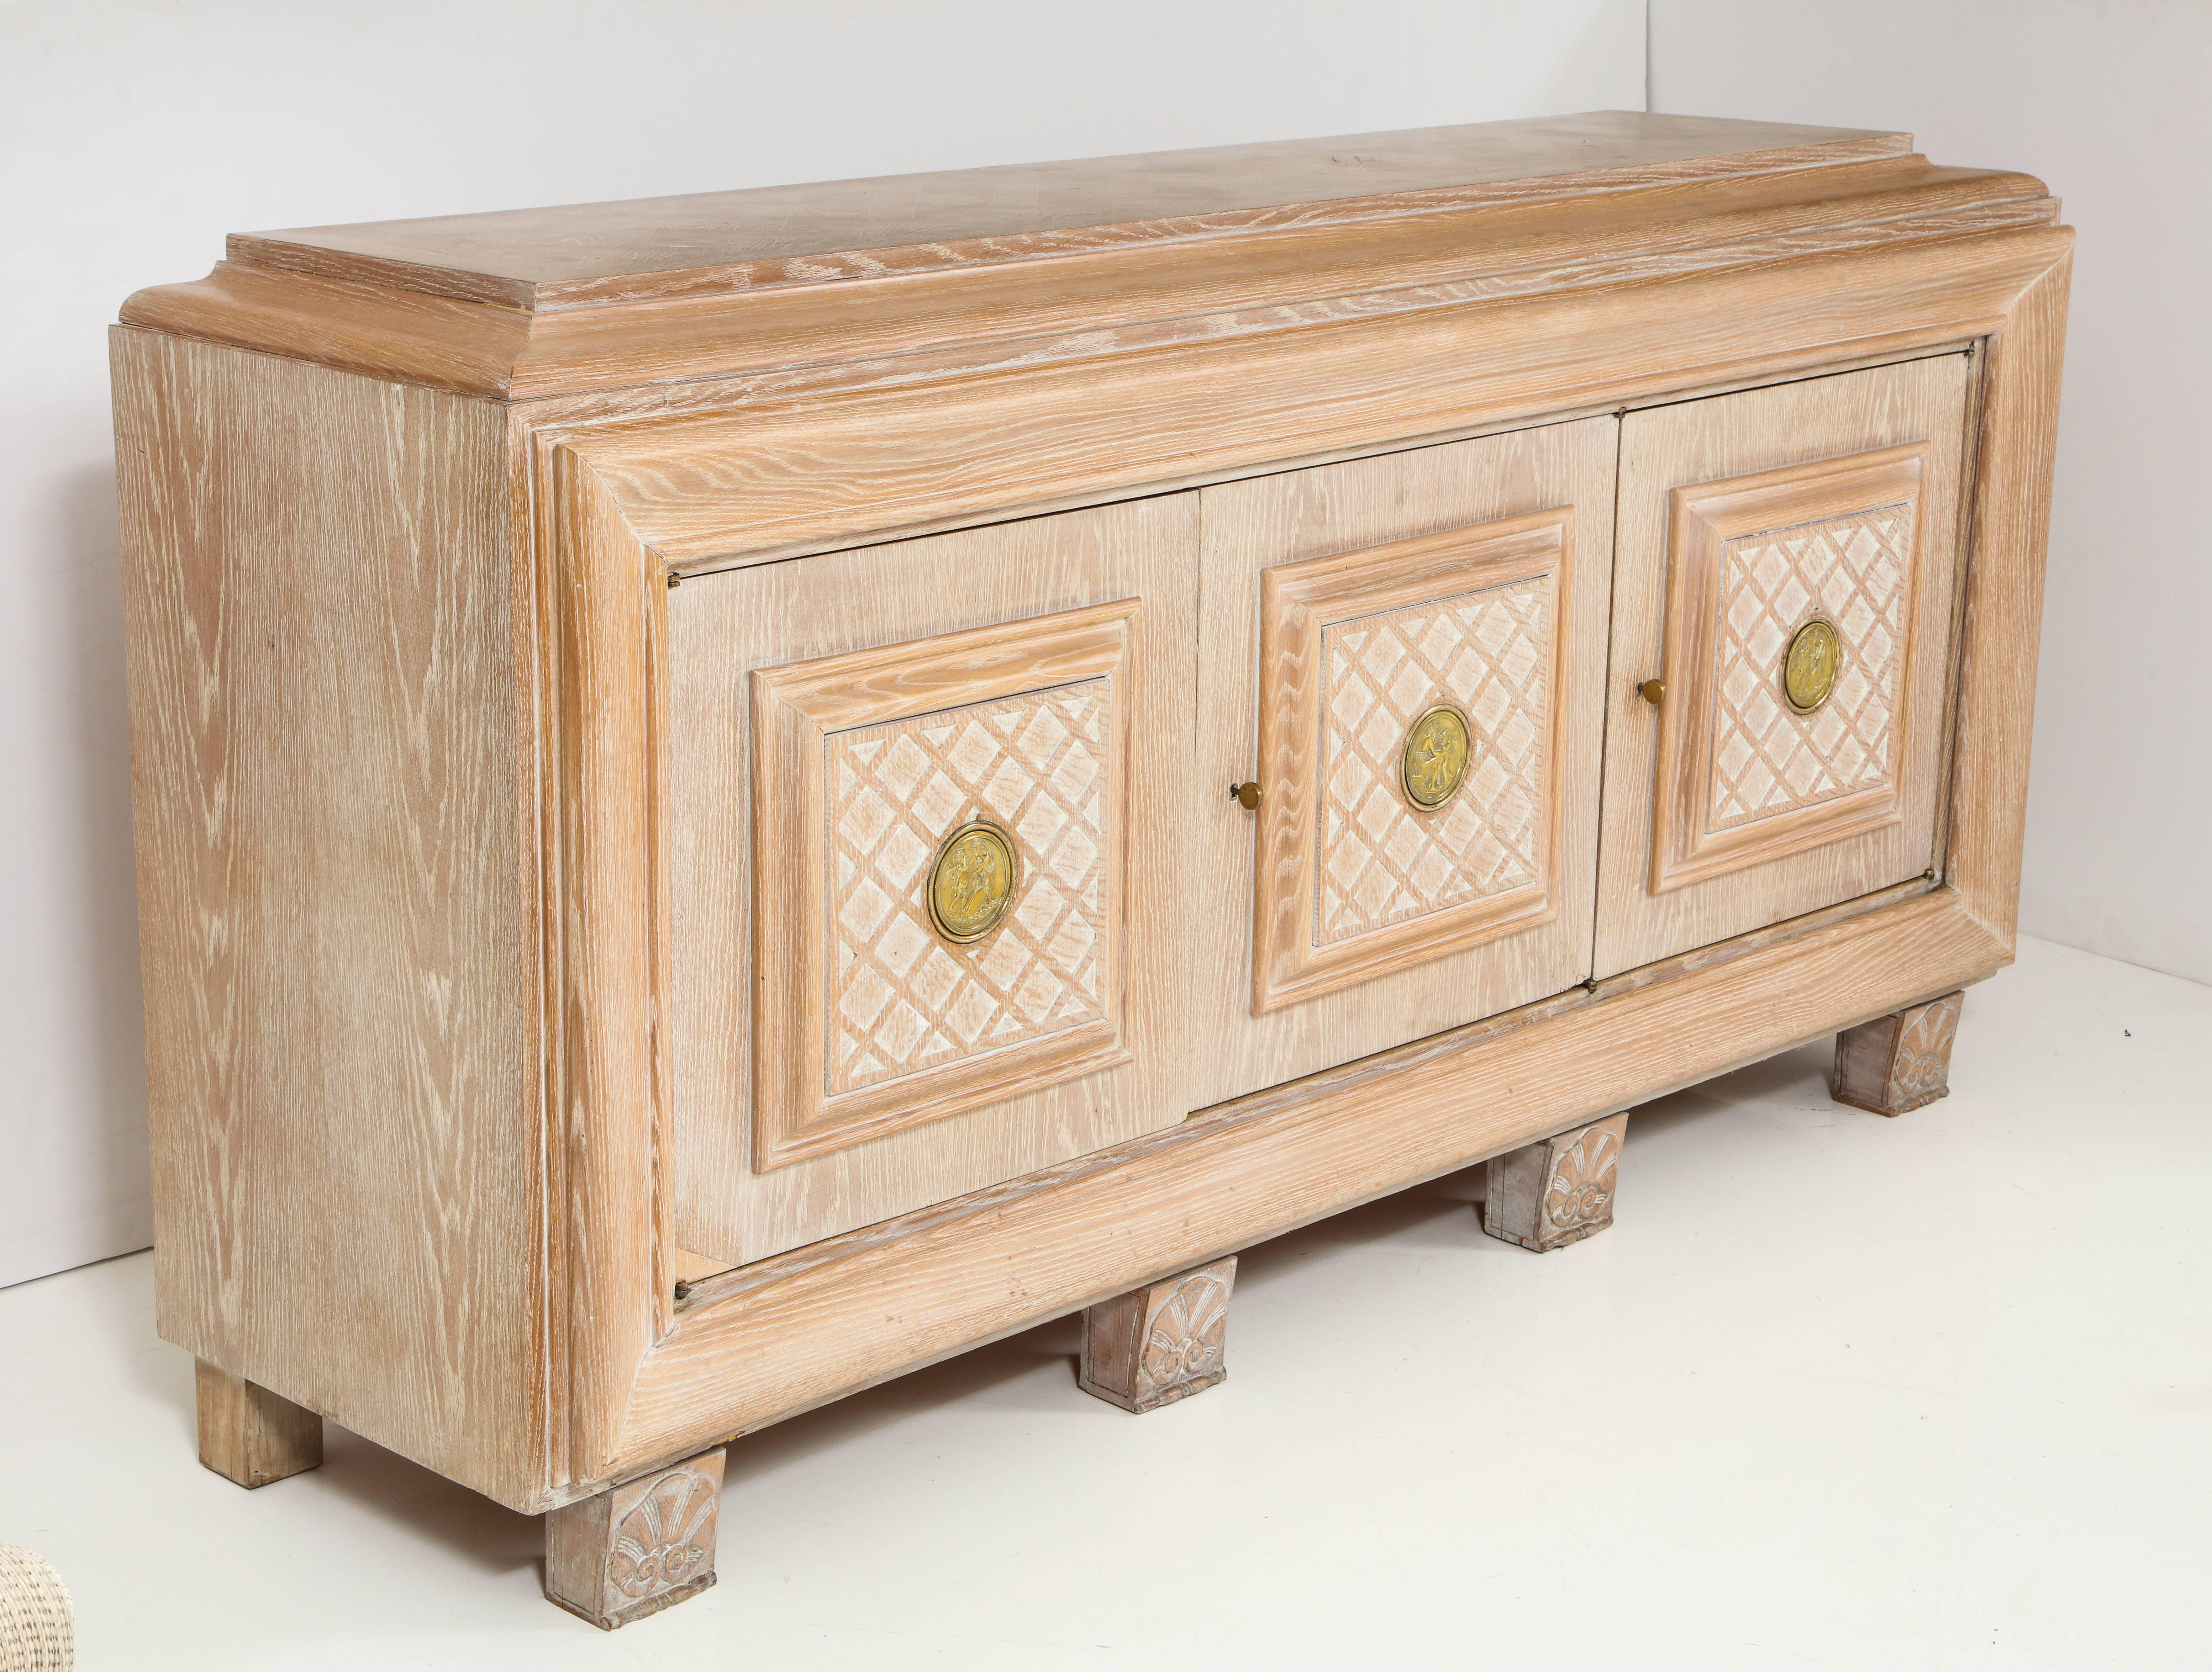 A French Art Deco cerused oak sideboard with three doors with carved cross hatch design; the case resting on four square block carved supports with shell motif.  The two outer doors  open to reveal two shelves, the central door with a top shelf